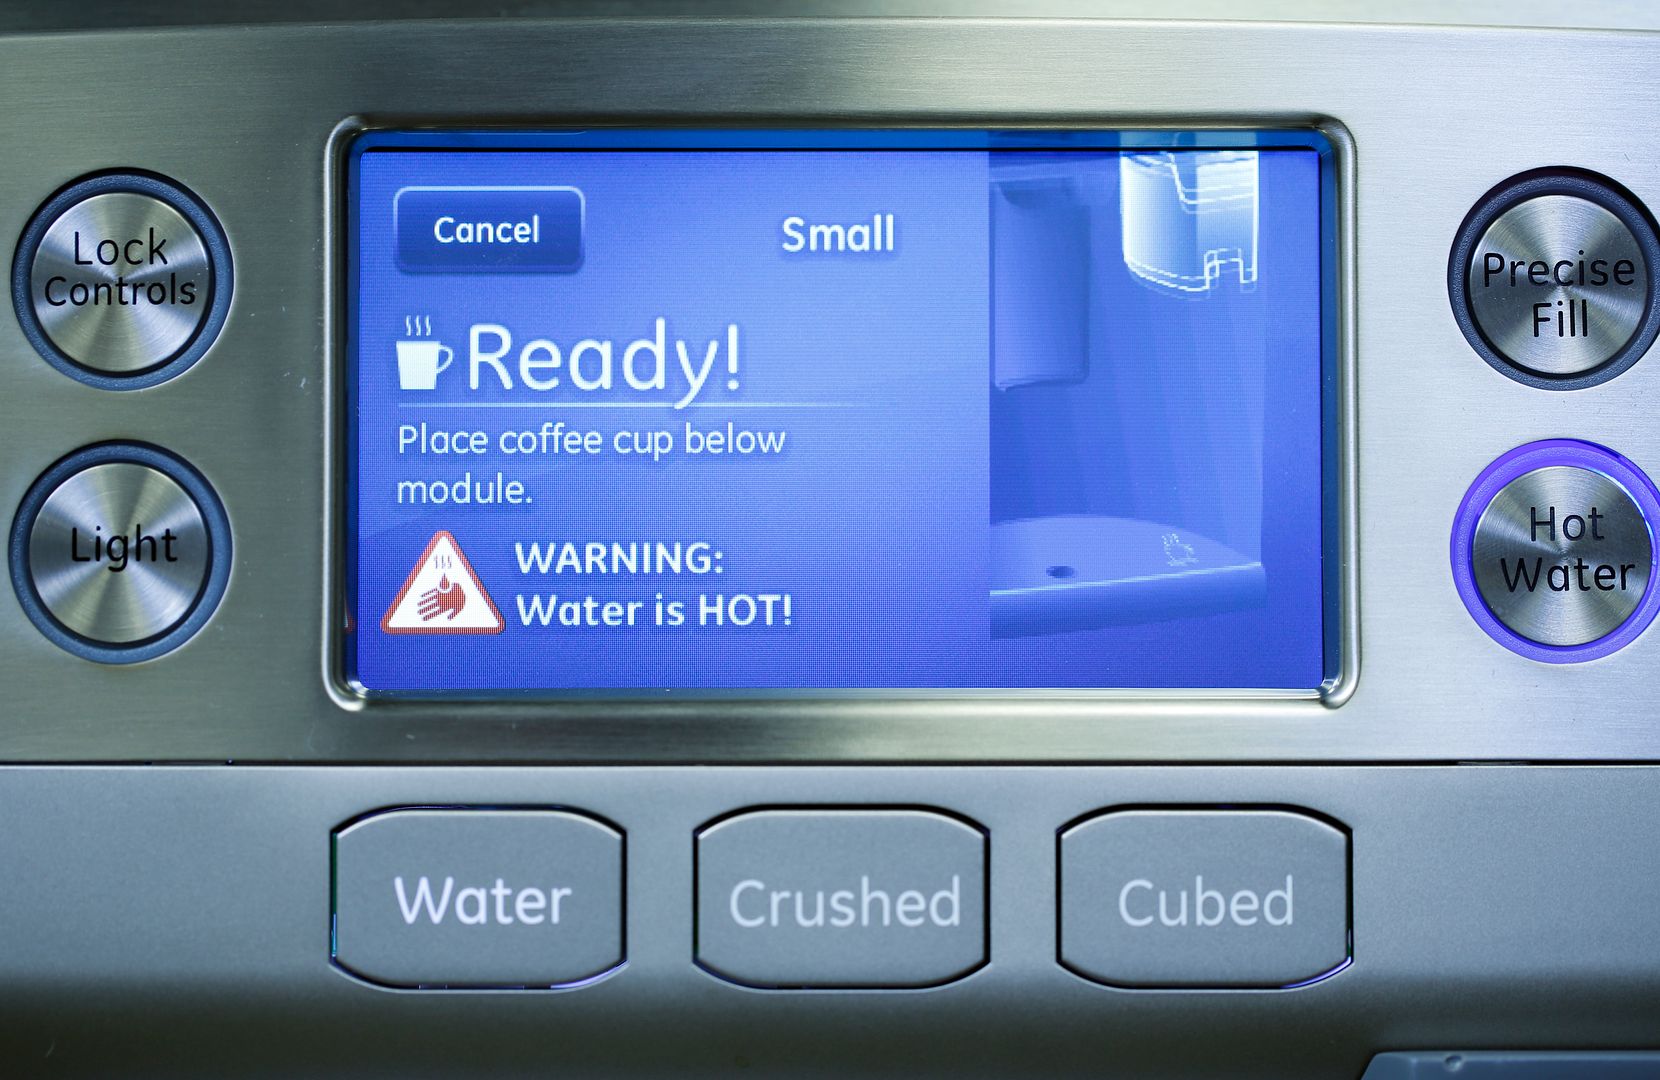 Control panel on the new GE Cafe series refrigerator with a built-in Keurig machine